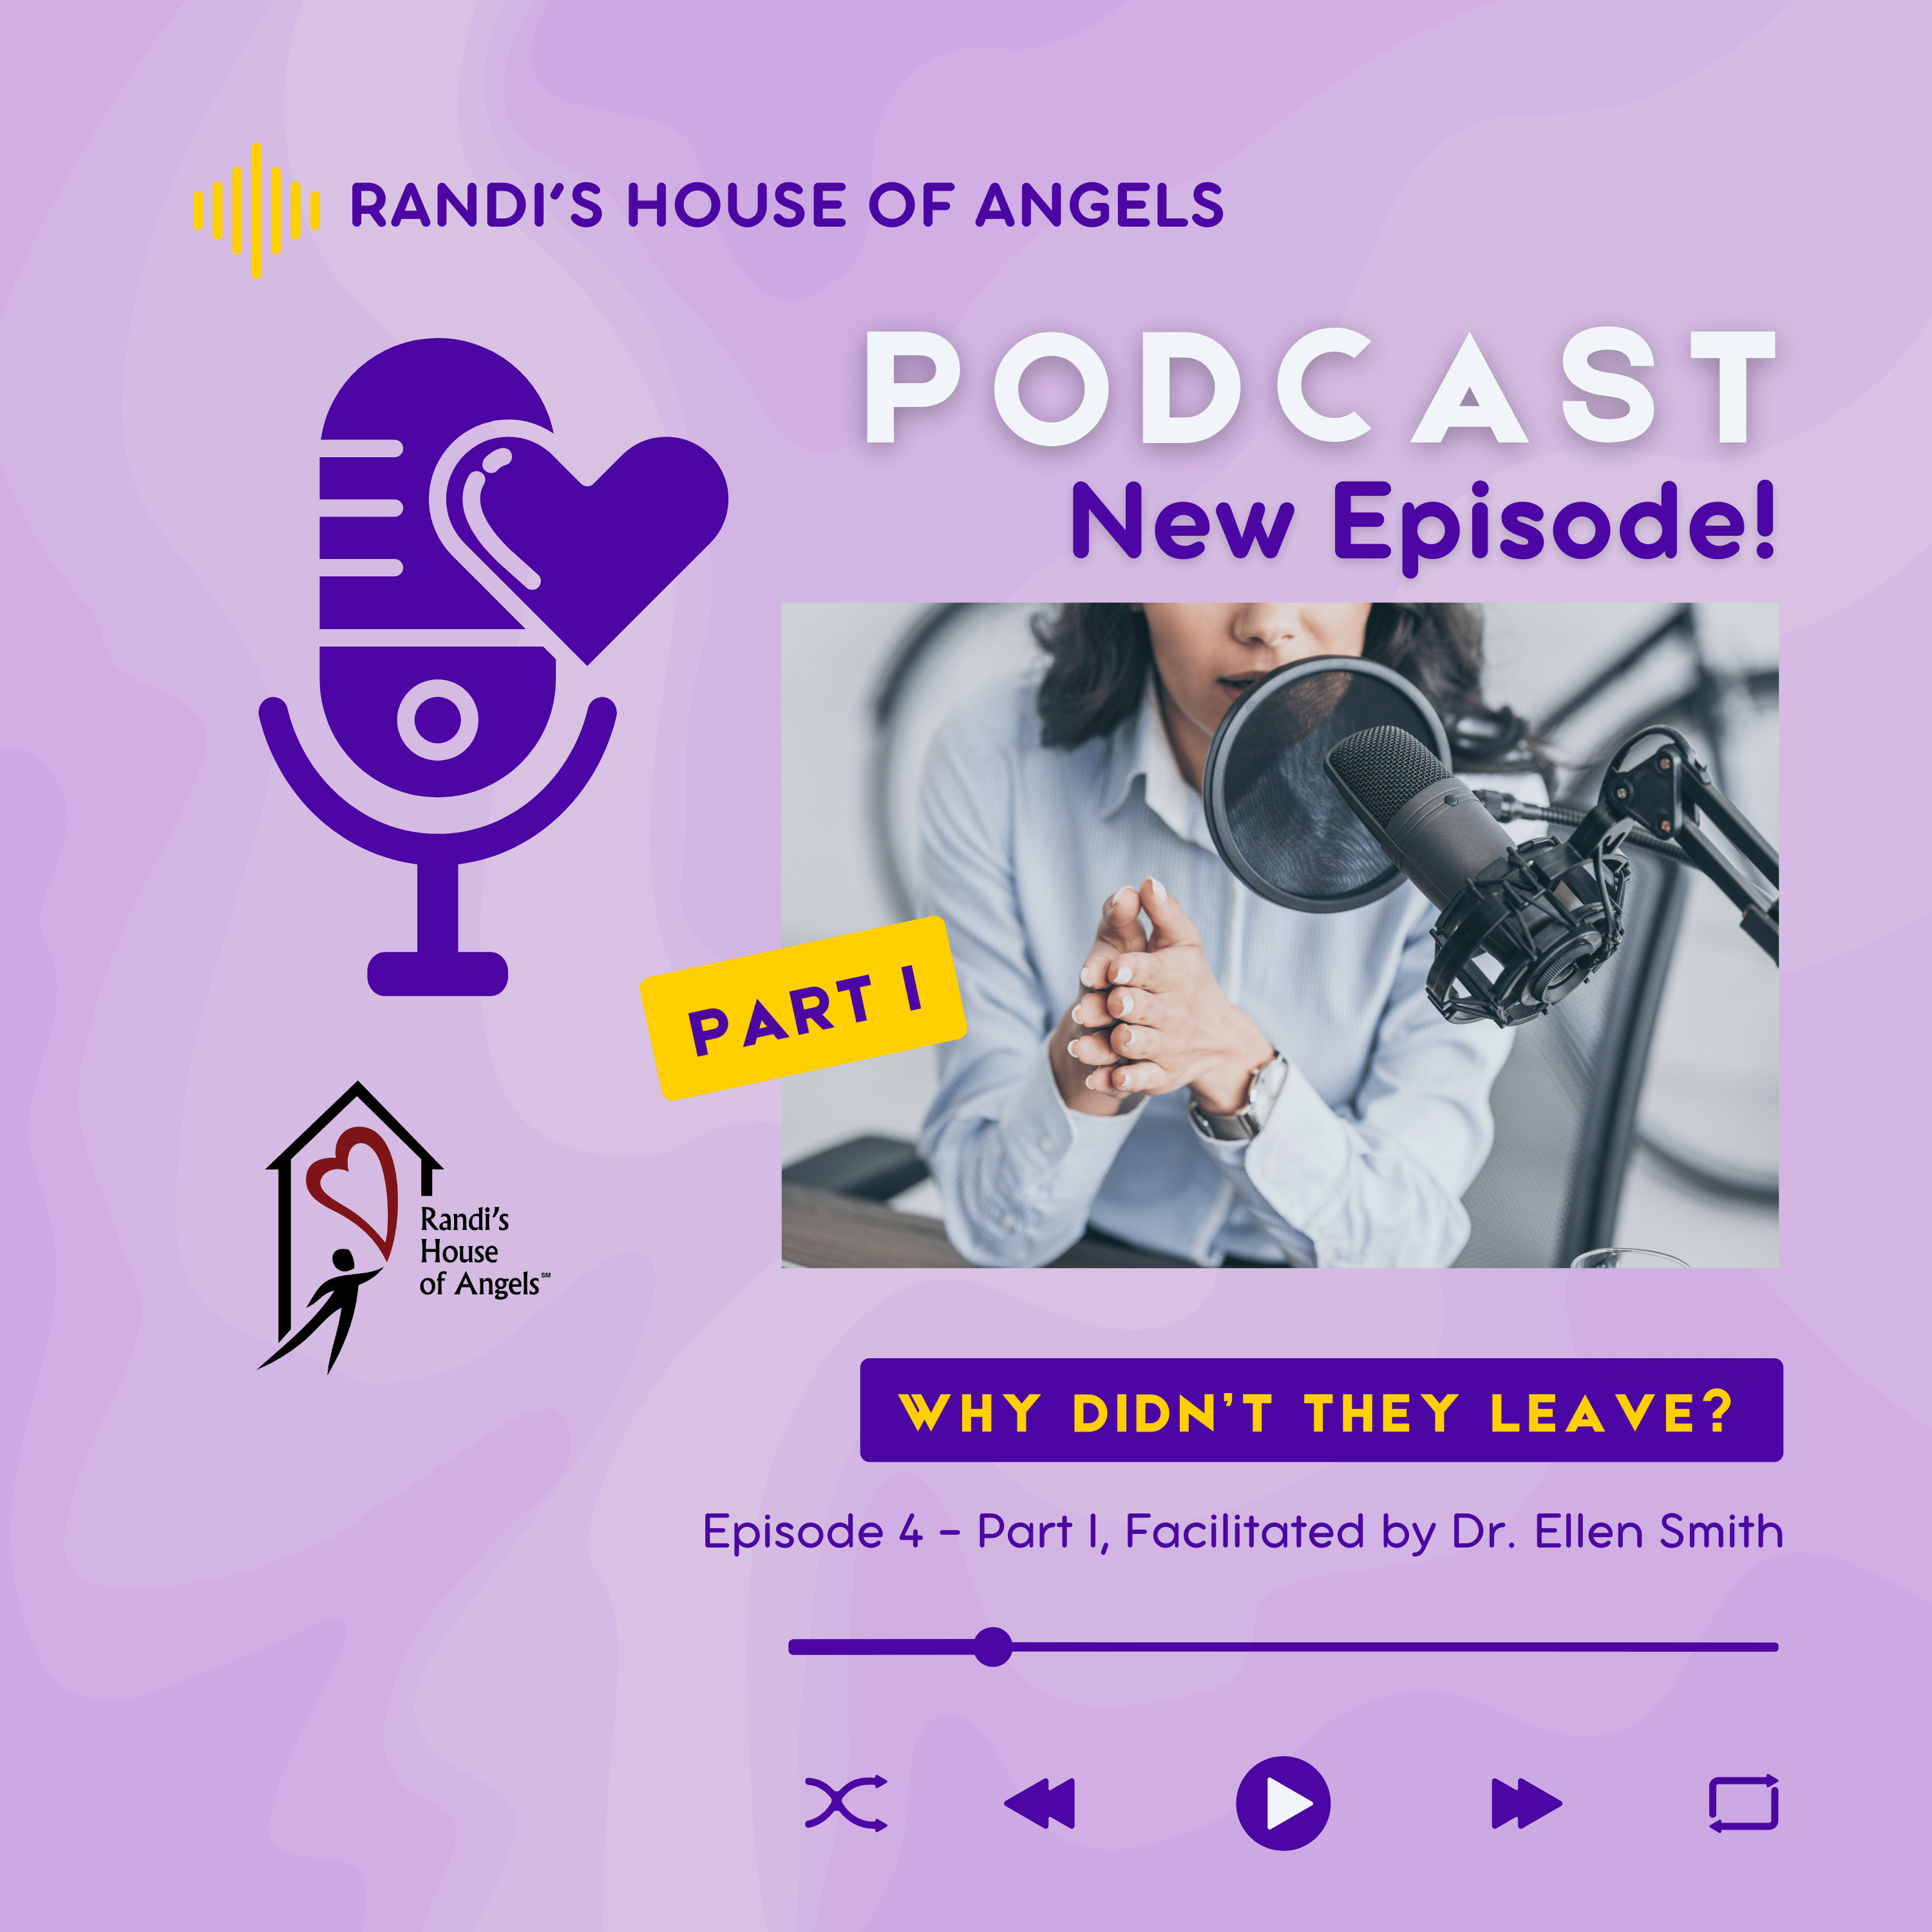 Randi's House of Angels (RHOA) Podcast Episode 4 - Why didn't they leave? Exploring the reasons why people stay in unhealthy relationships - Part 1 - cover art